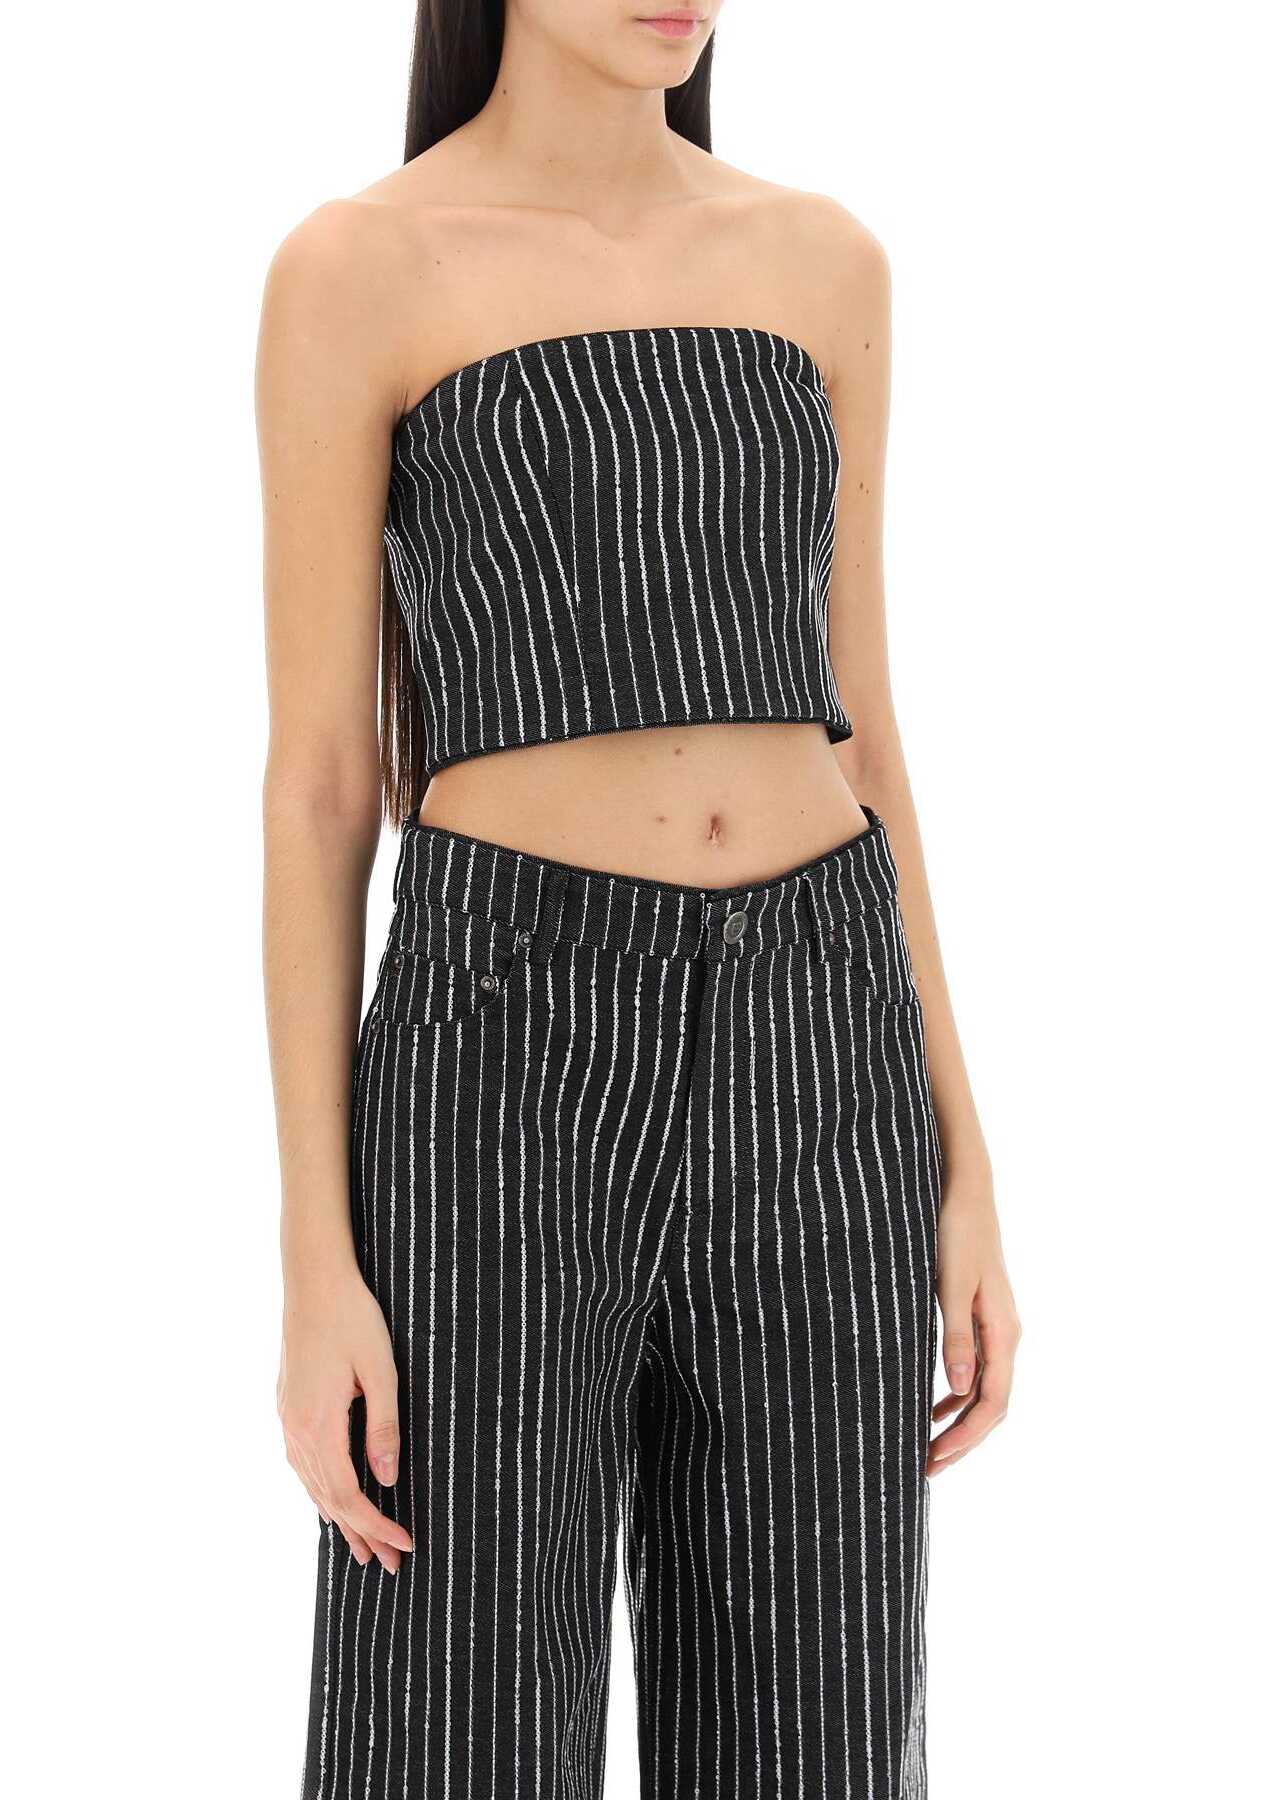 ROTATE Birger Christensen Cropped Top With Sequined Stripes BLACK